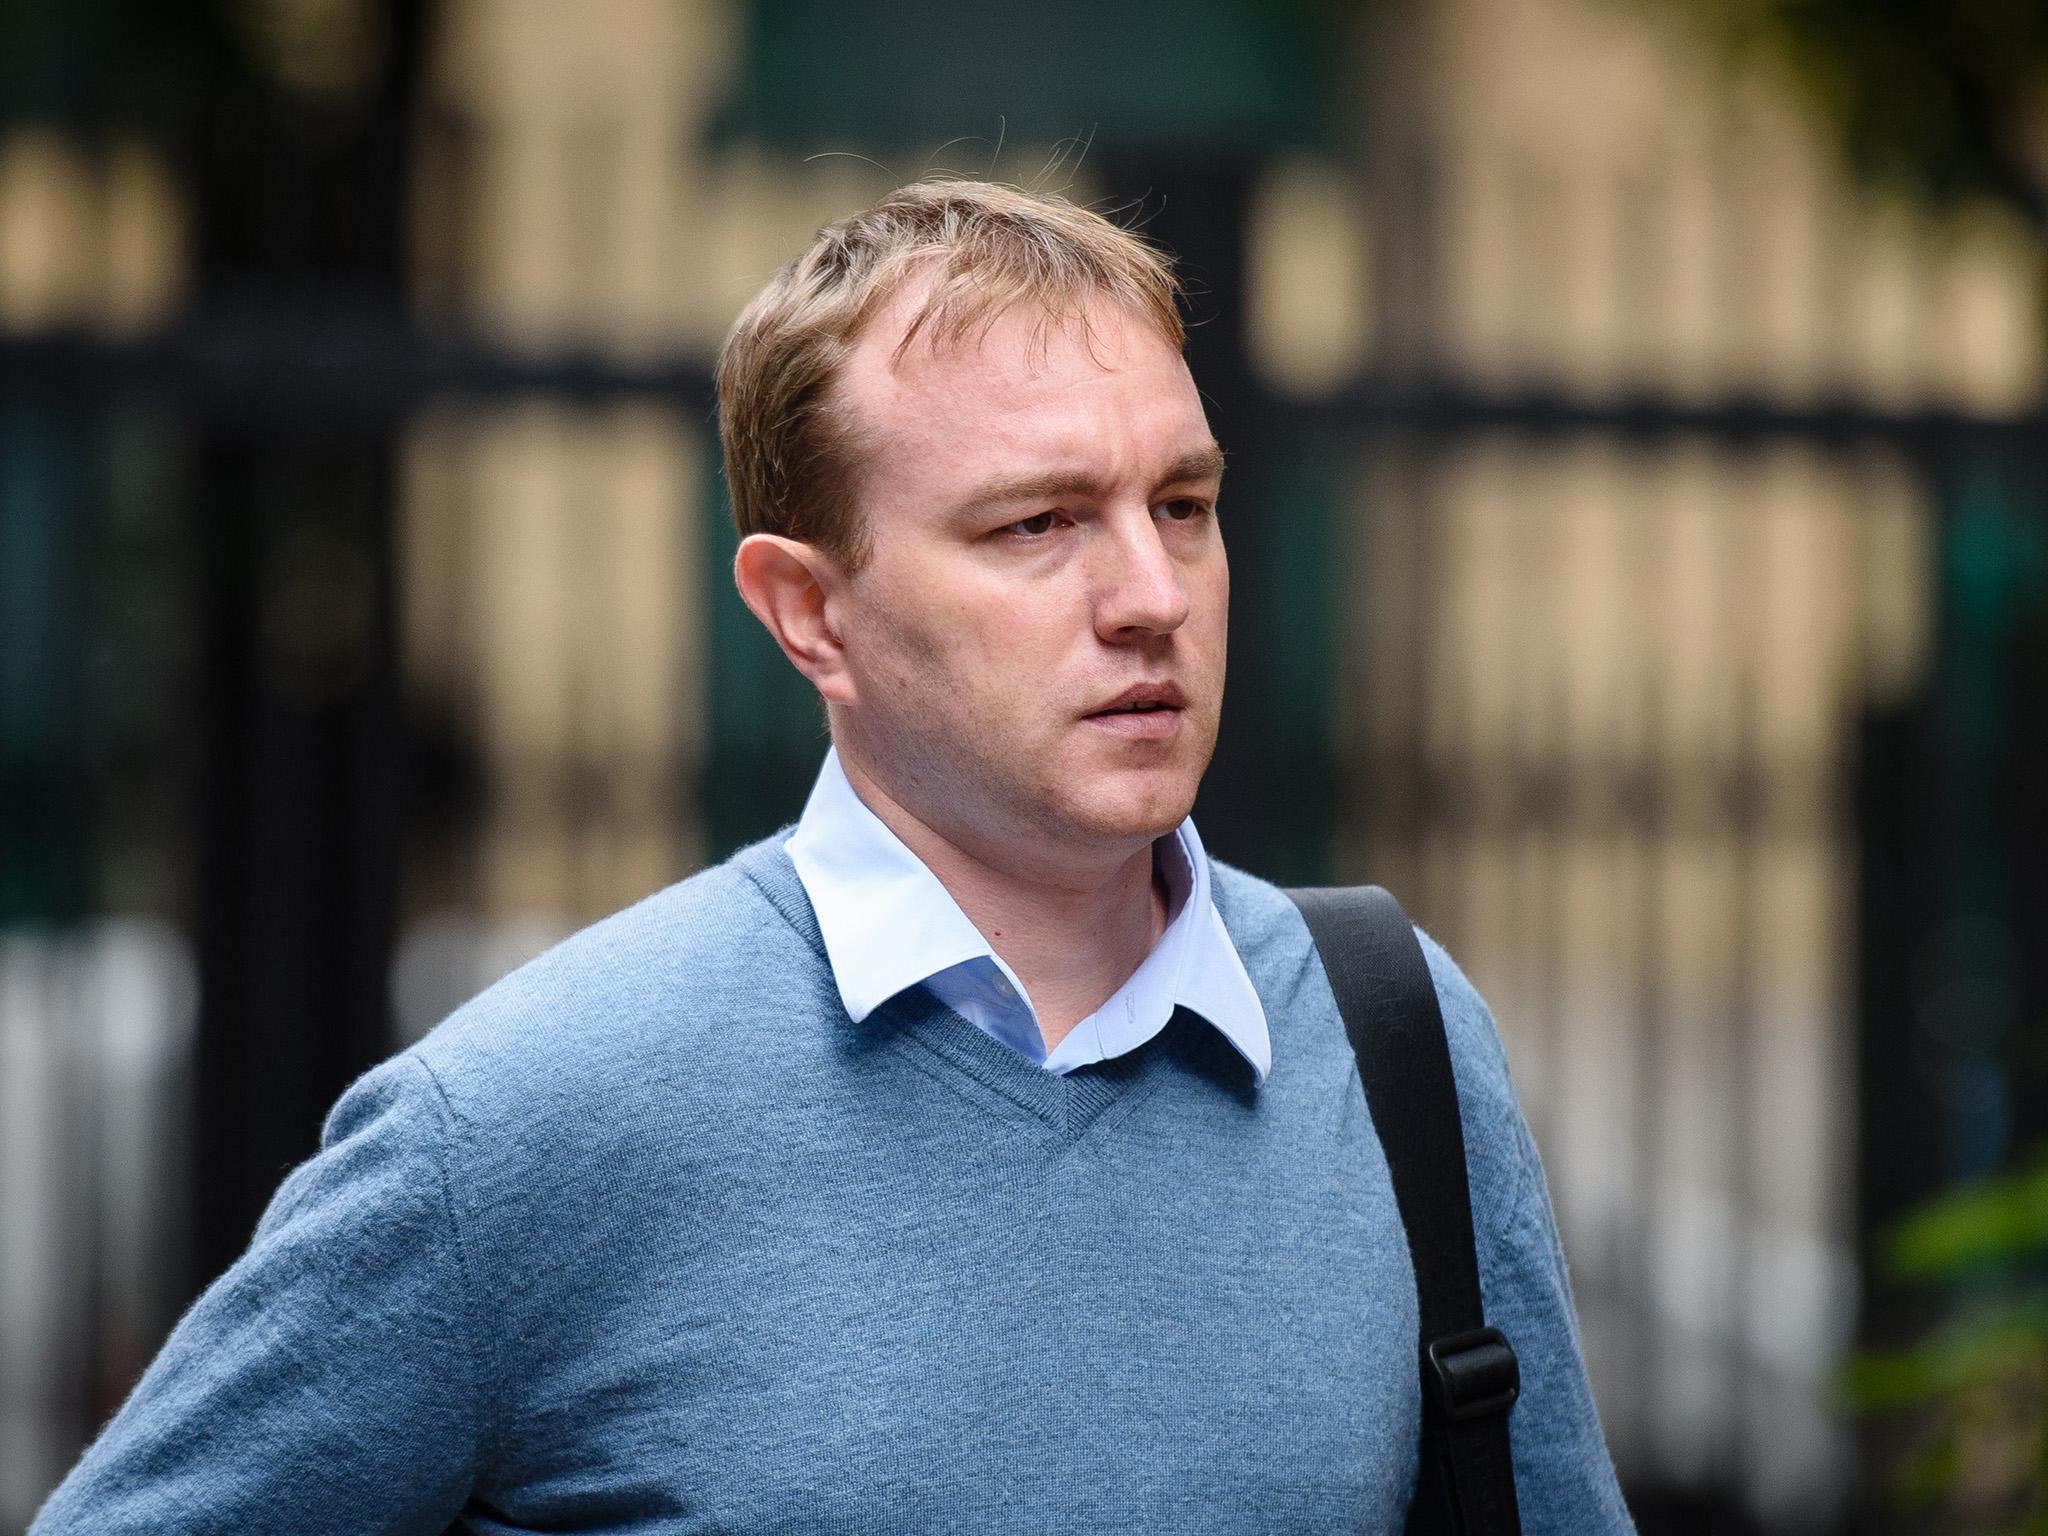 Tom Hayes of UBS and Citigroup was jailed for rigging interest rates